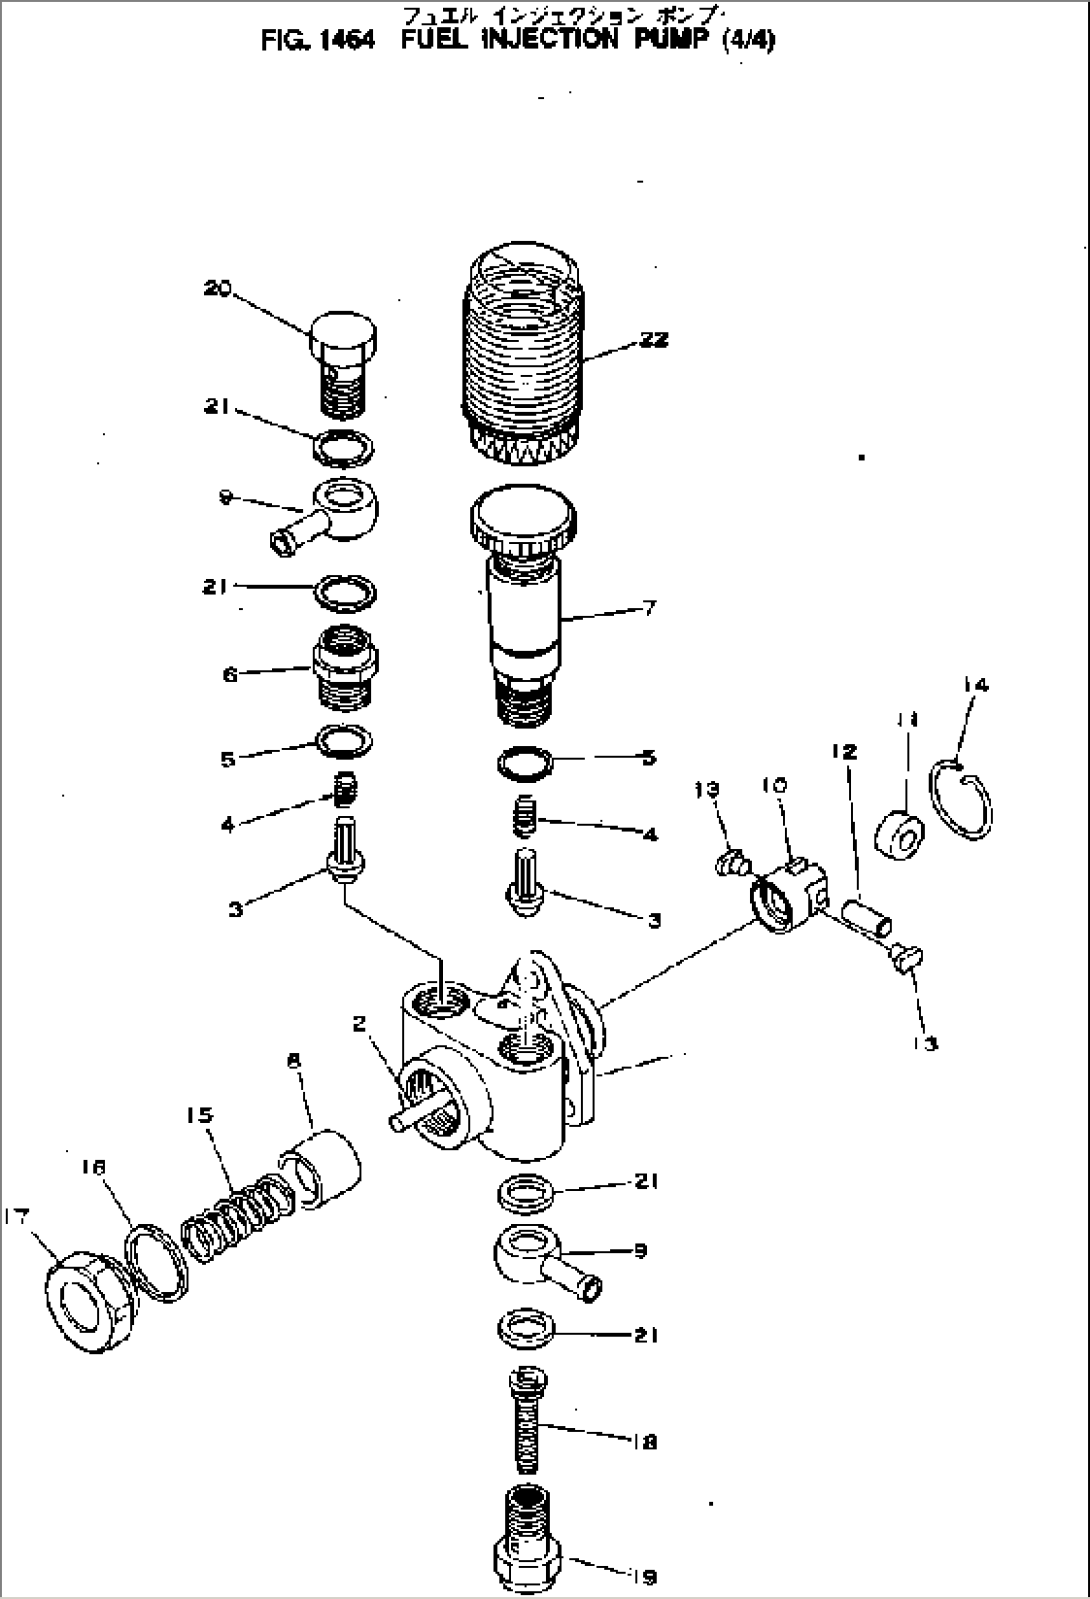 FUEL INJECTION PUMP (4/4)